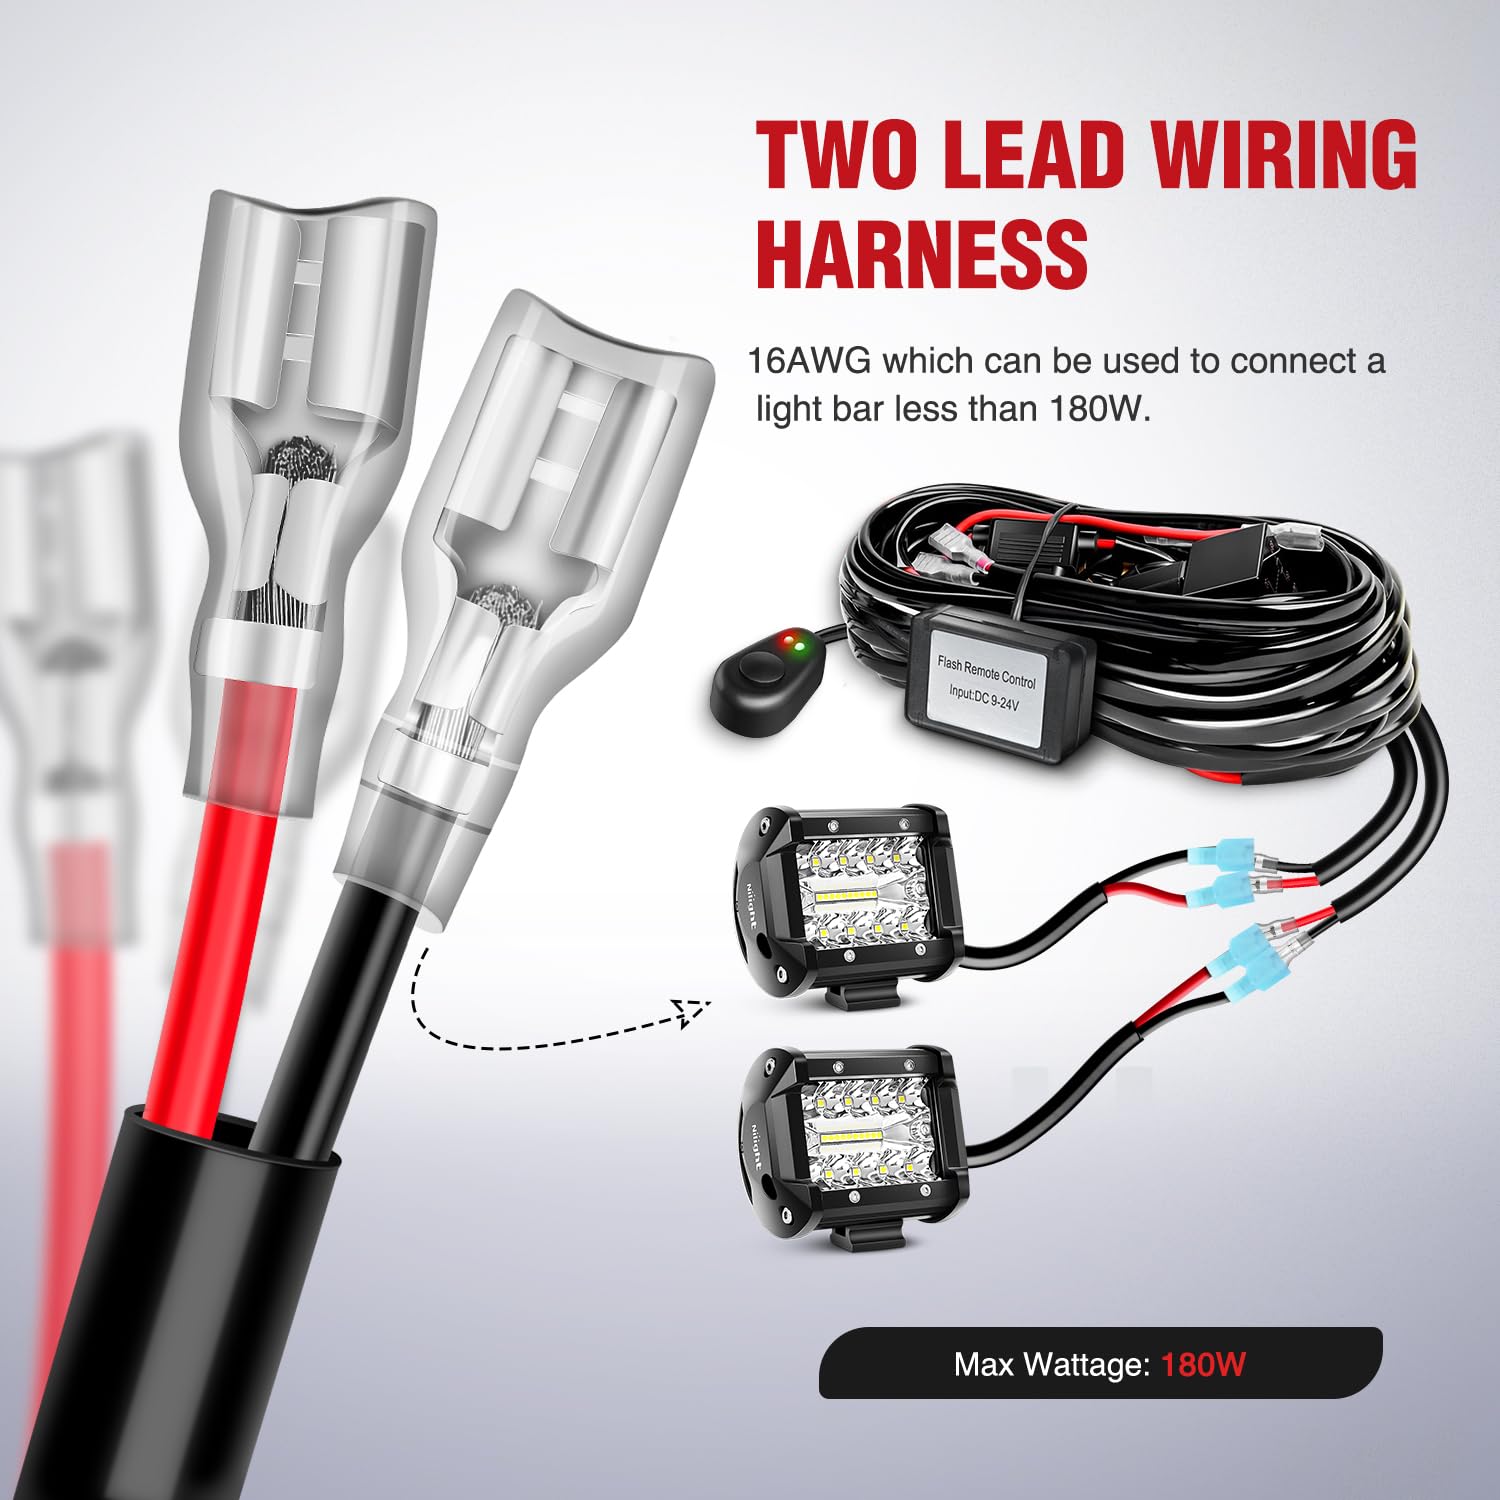 16AWG Wire Harness Kit 2 Leads W/ Remote Controller Switch | 3 Fuses | 4 Spade Connectors Nilight